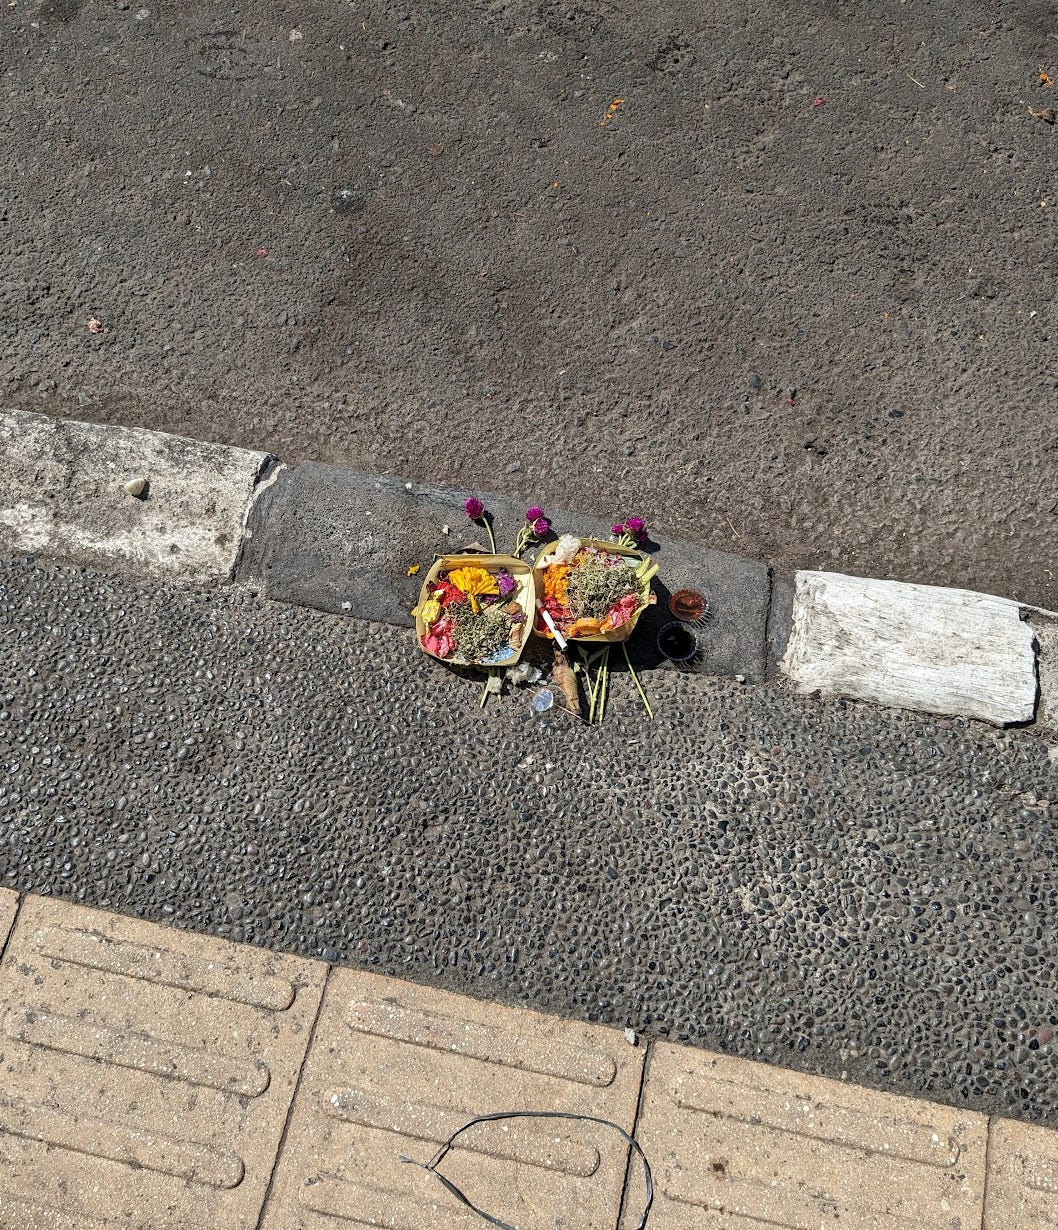 Yellow, purple, and white flowers are placed in banana leaves that were shaped into a bowl shape to hold in the offerings. The offering is placed on the edge of a sidewalk